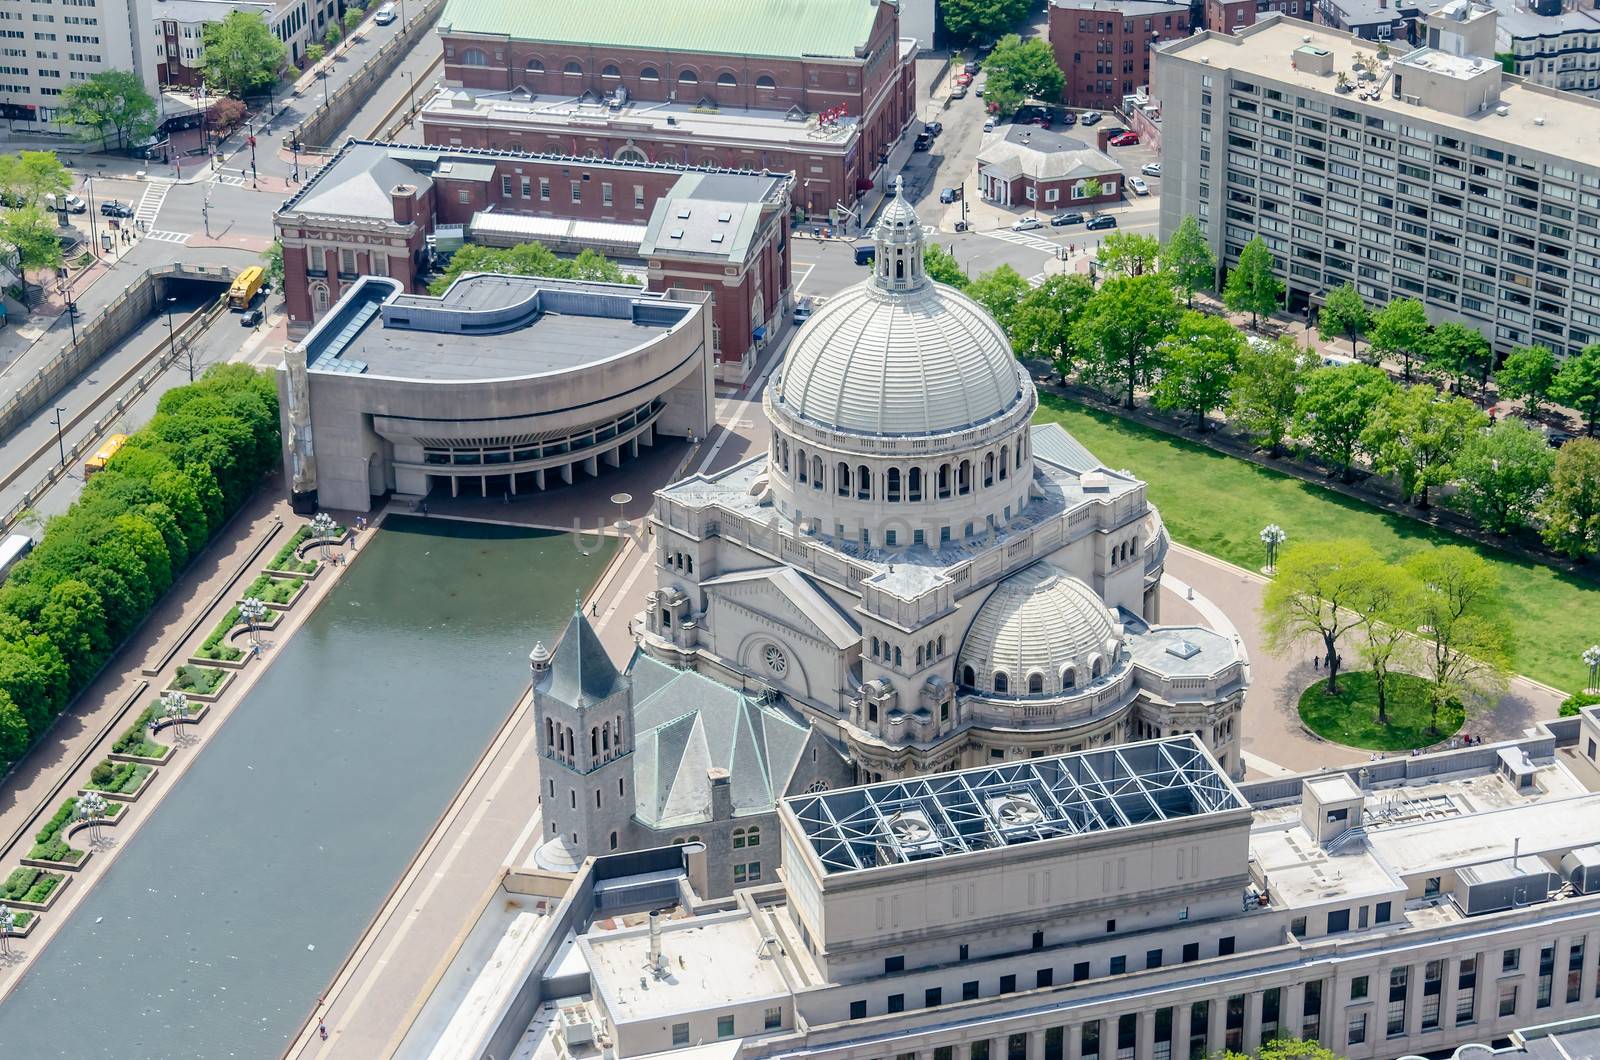 Aerial View of the First Church of Christ Scientist, Boston by marcorubino